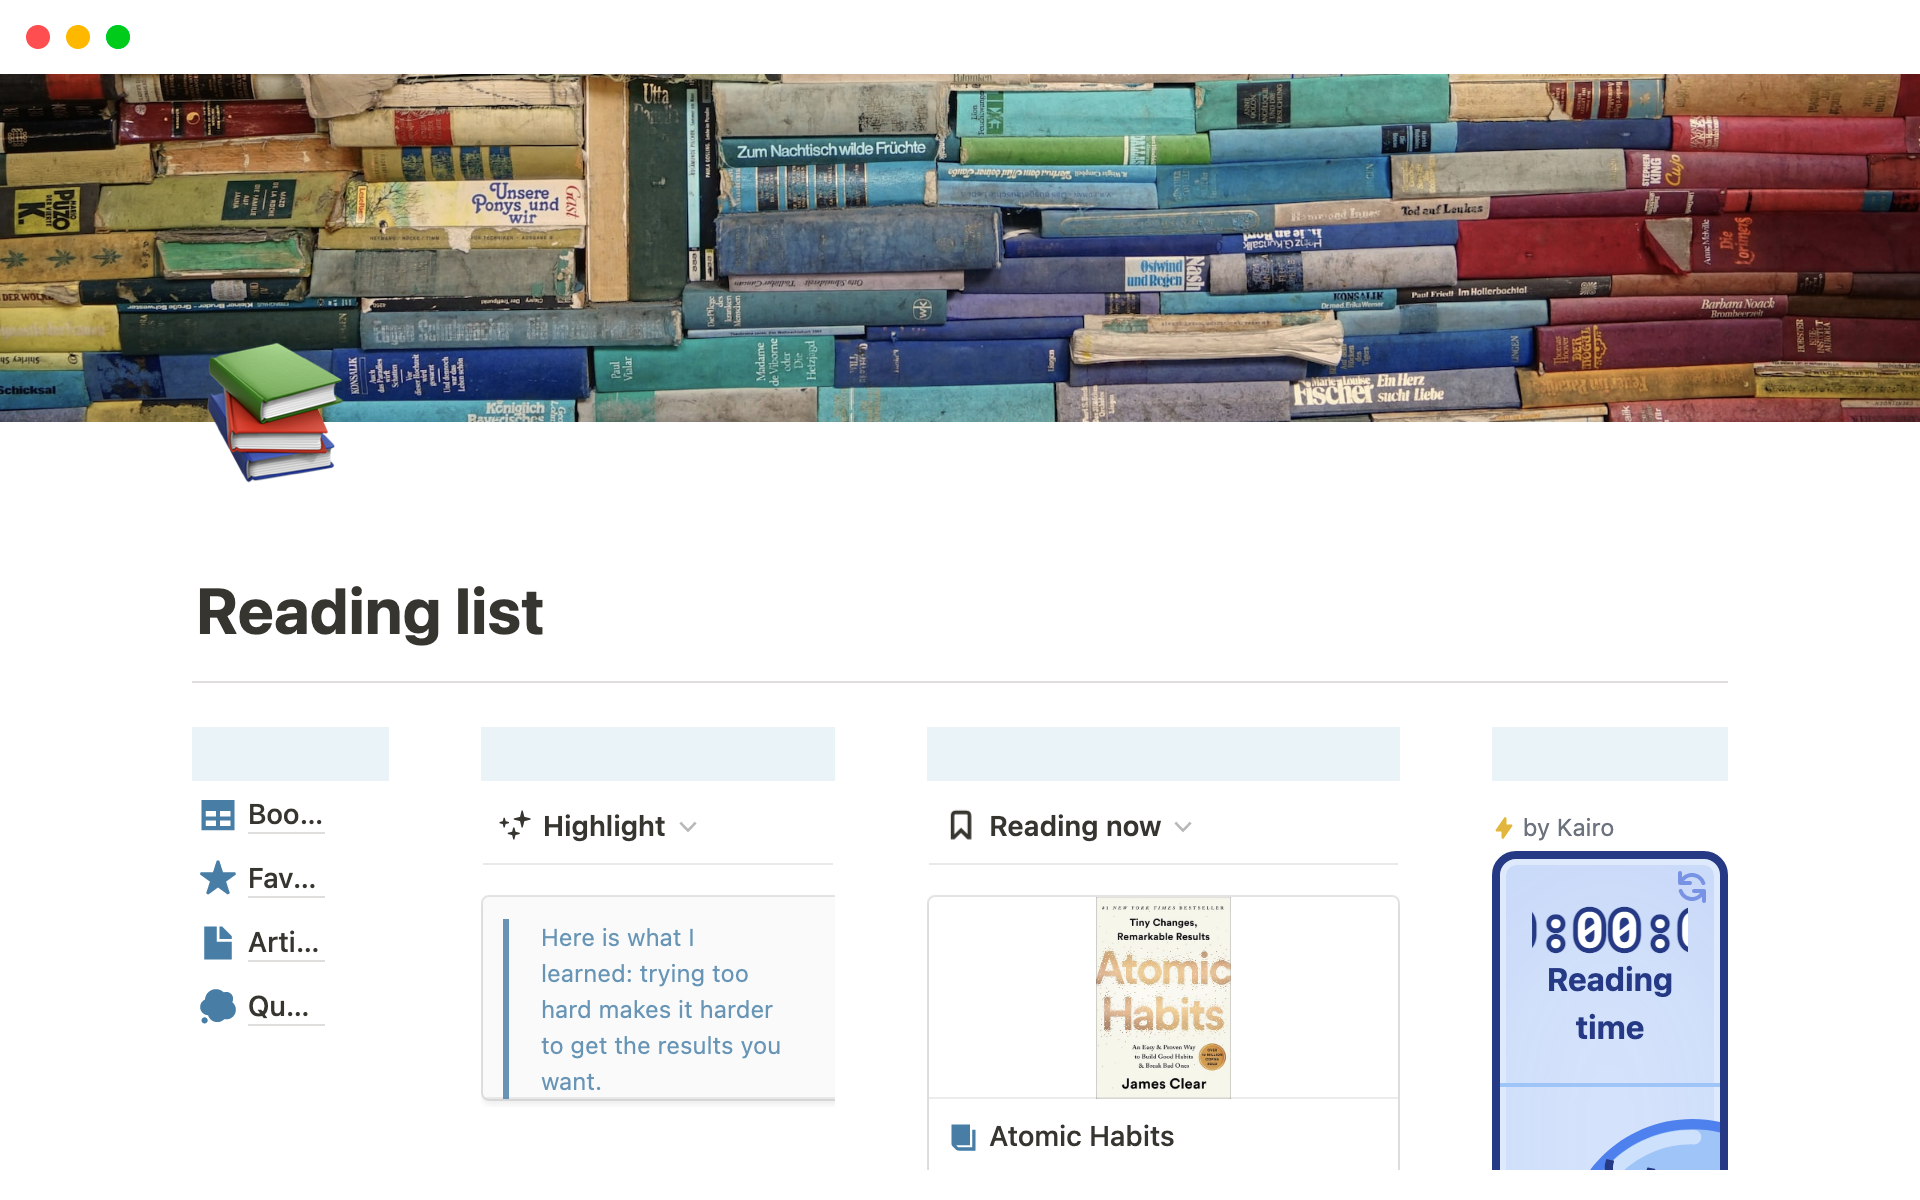 This template allows users to easily keep track of the books and articles they want to read, record highlights and monitor their reading progress.